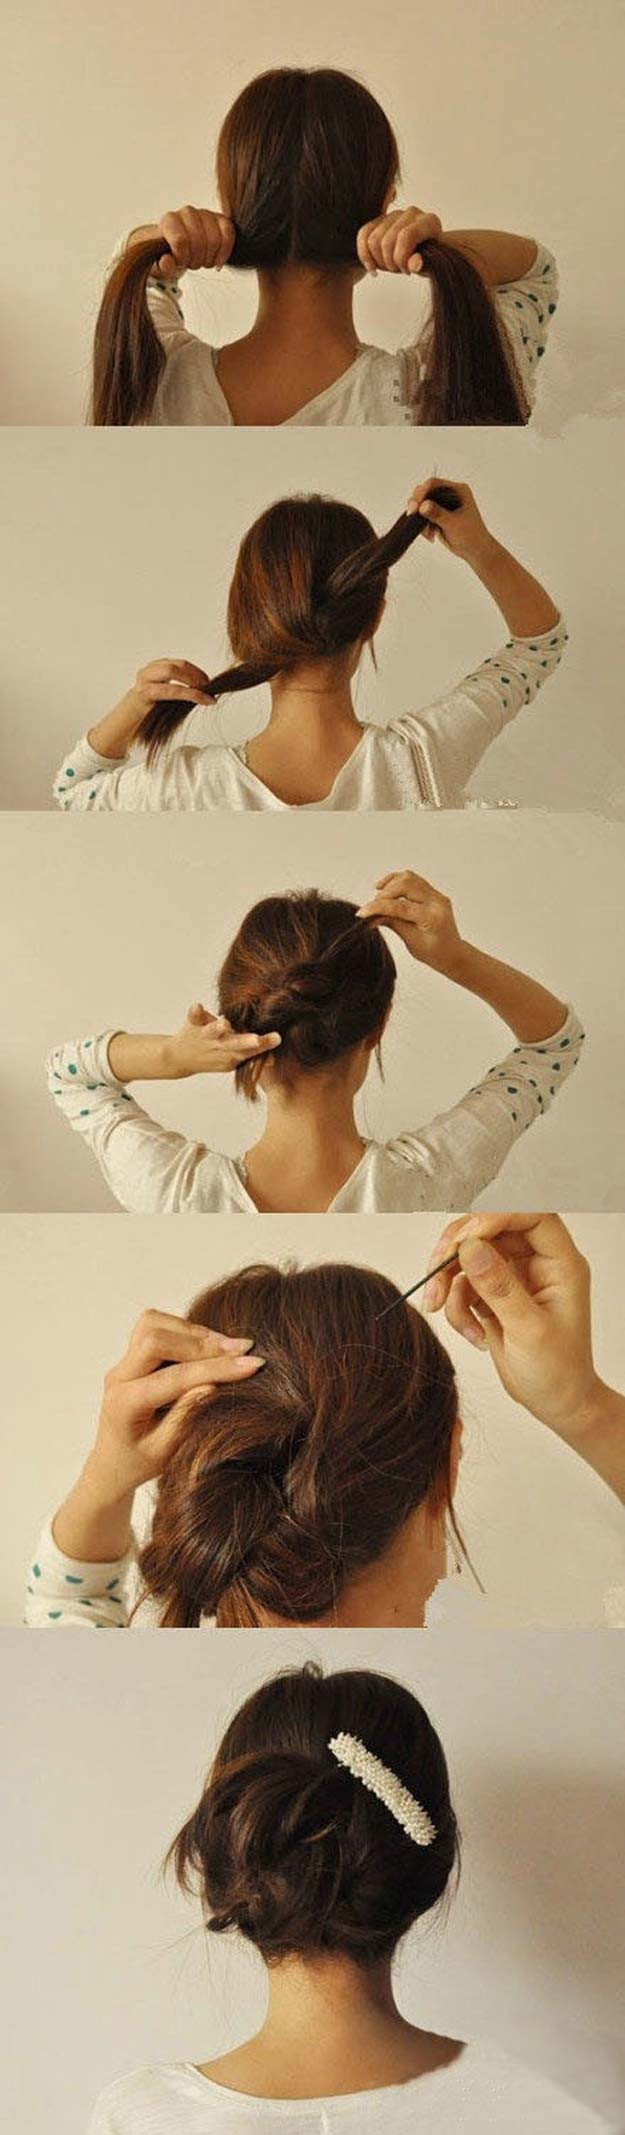 Easy Diy Haircuts
 36 Best Hairstyles for Long Hair DIY Projects for Teens